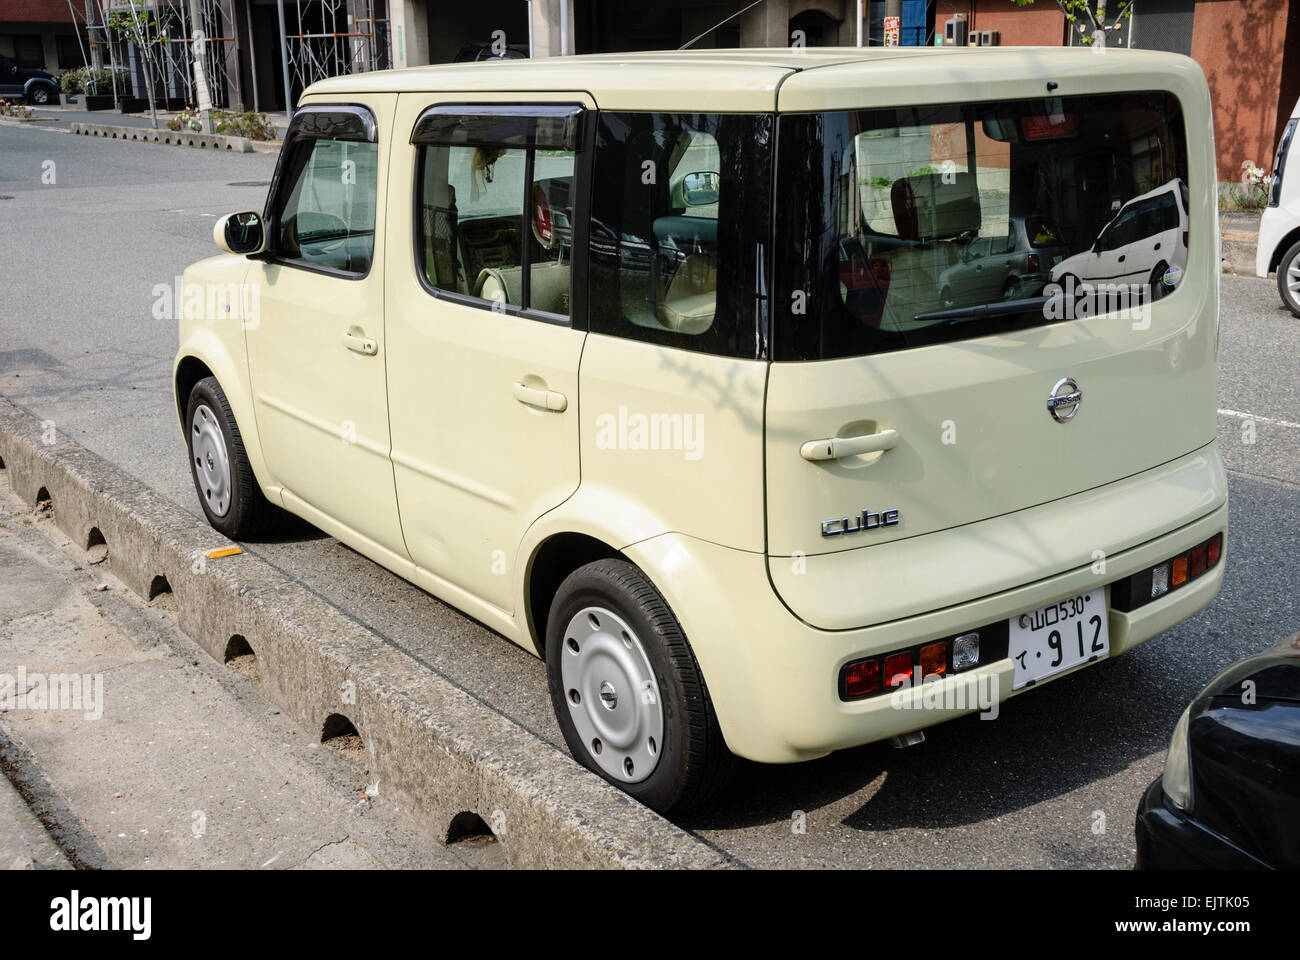 Interesting cuboid car; small Japanese car parked on the street. Stock Photo